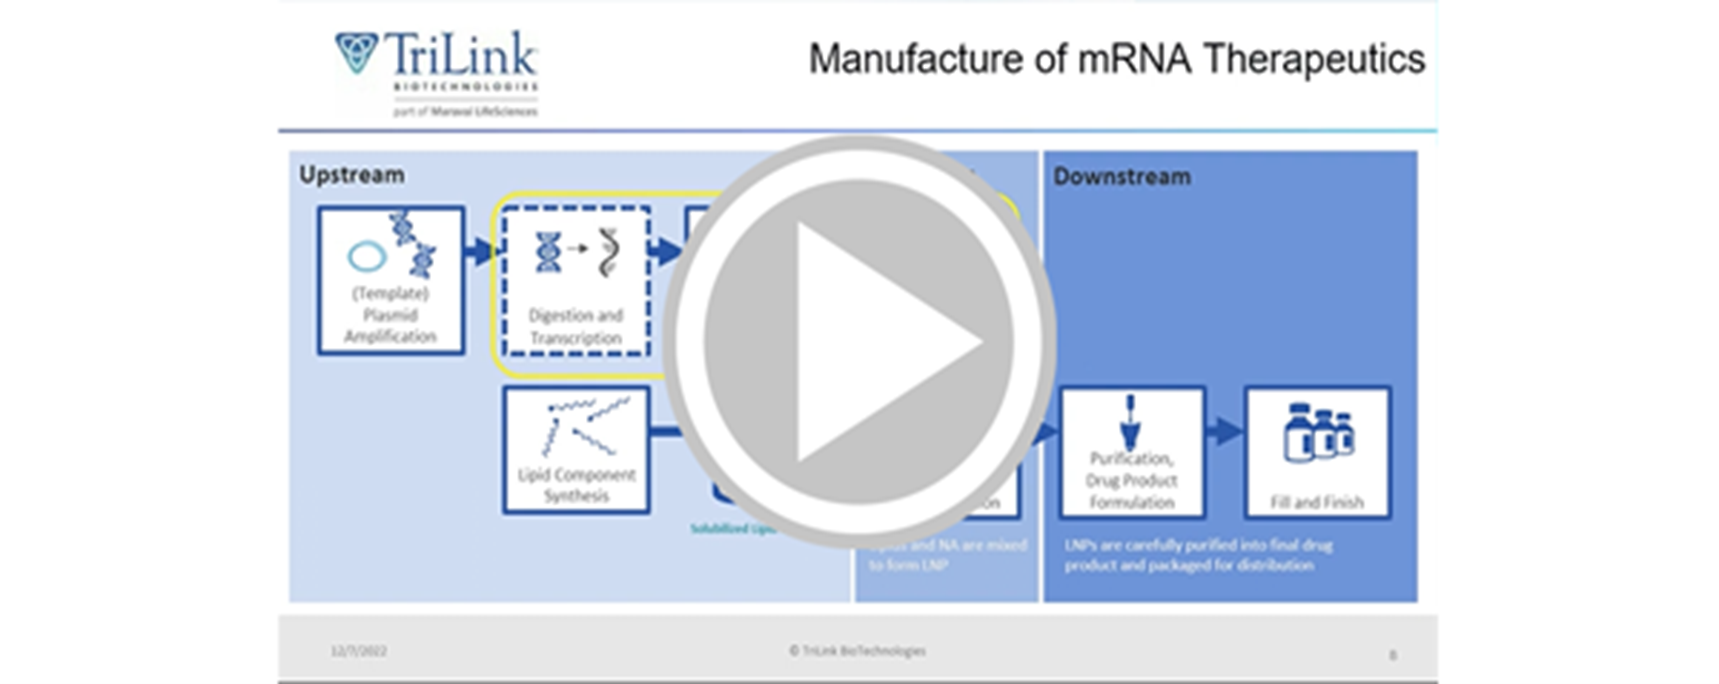 Manufacture_of_mRNA_Therapeutics.png